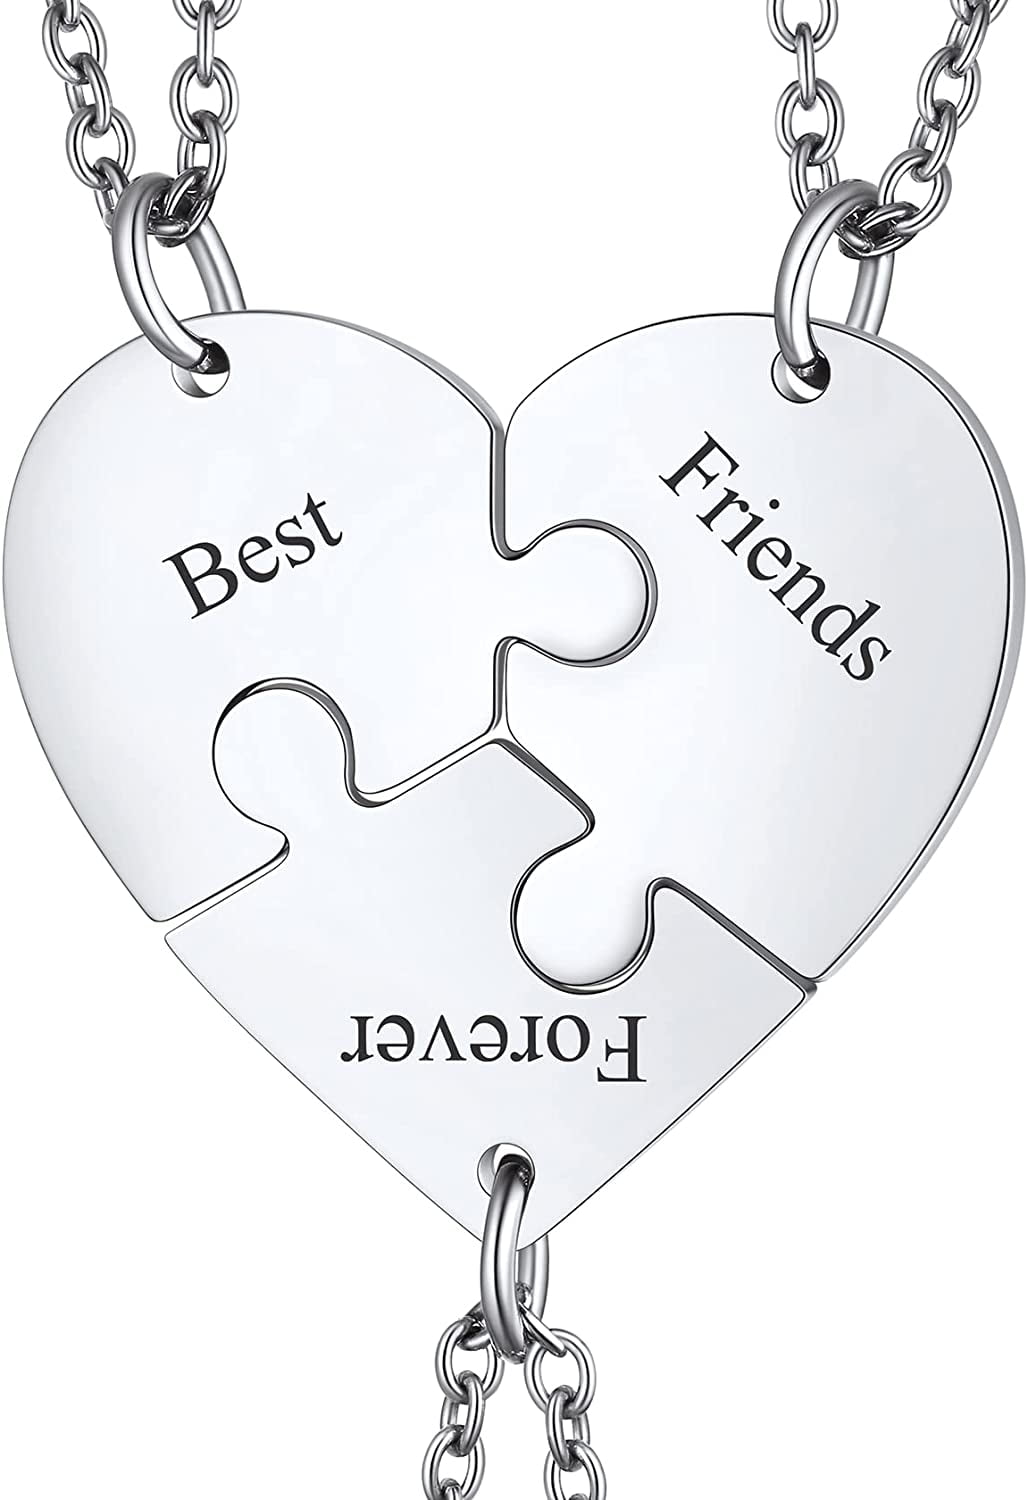 BFF Friendship Necklace for 2 - Heart Best Friends Pendant Necklaces Gifts  Set | eBay